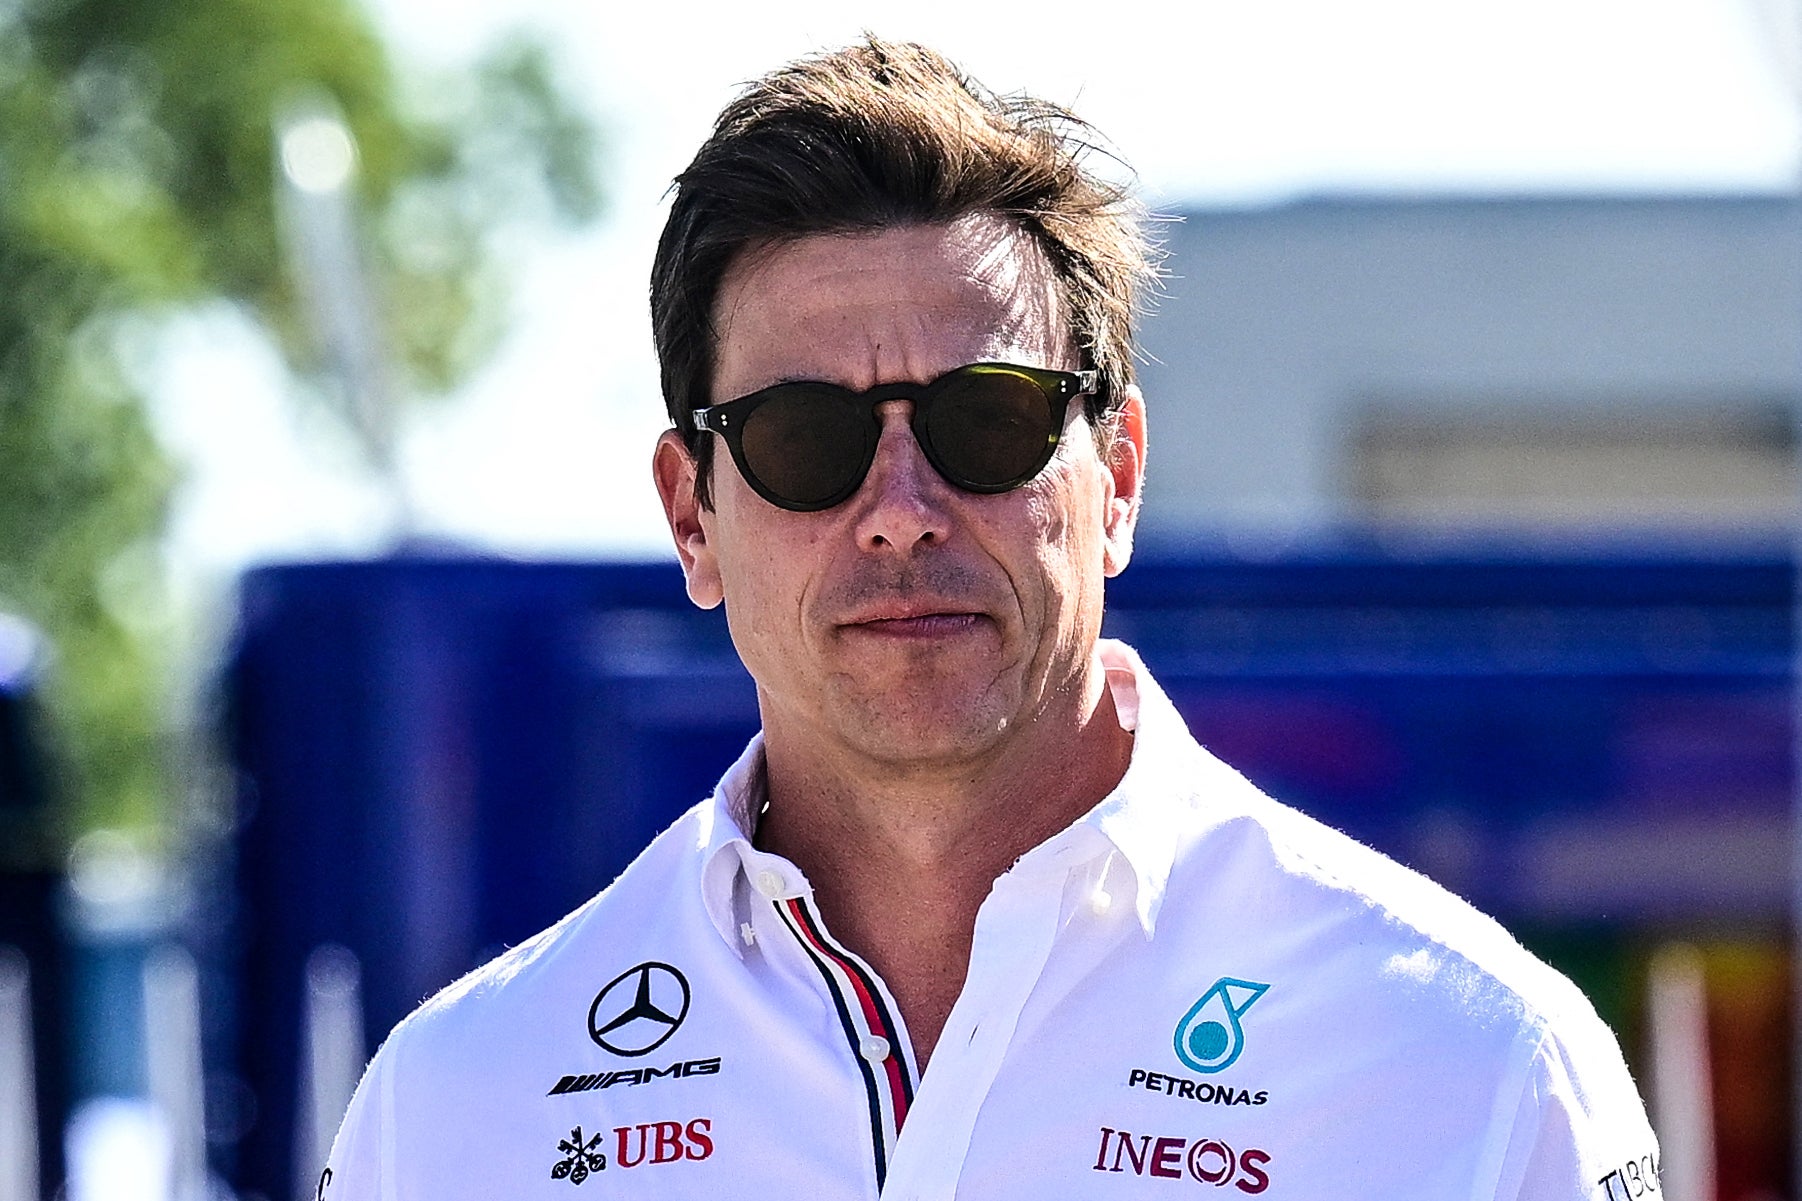 Toto Wolff gave his thoughts on the controversial finish